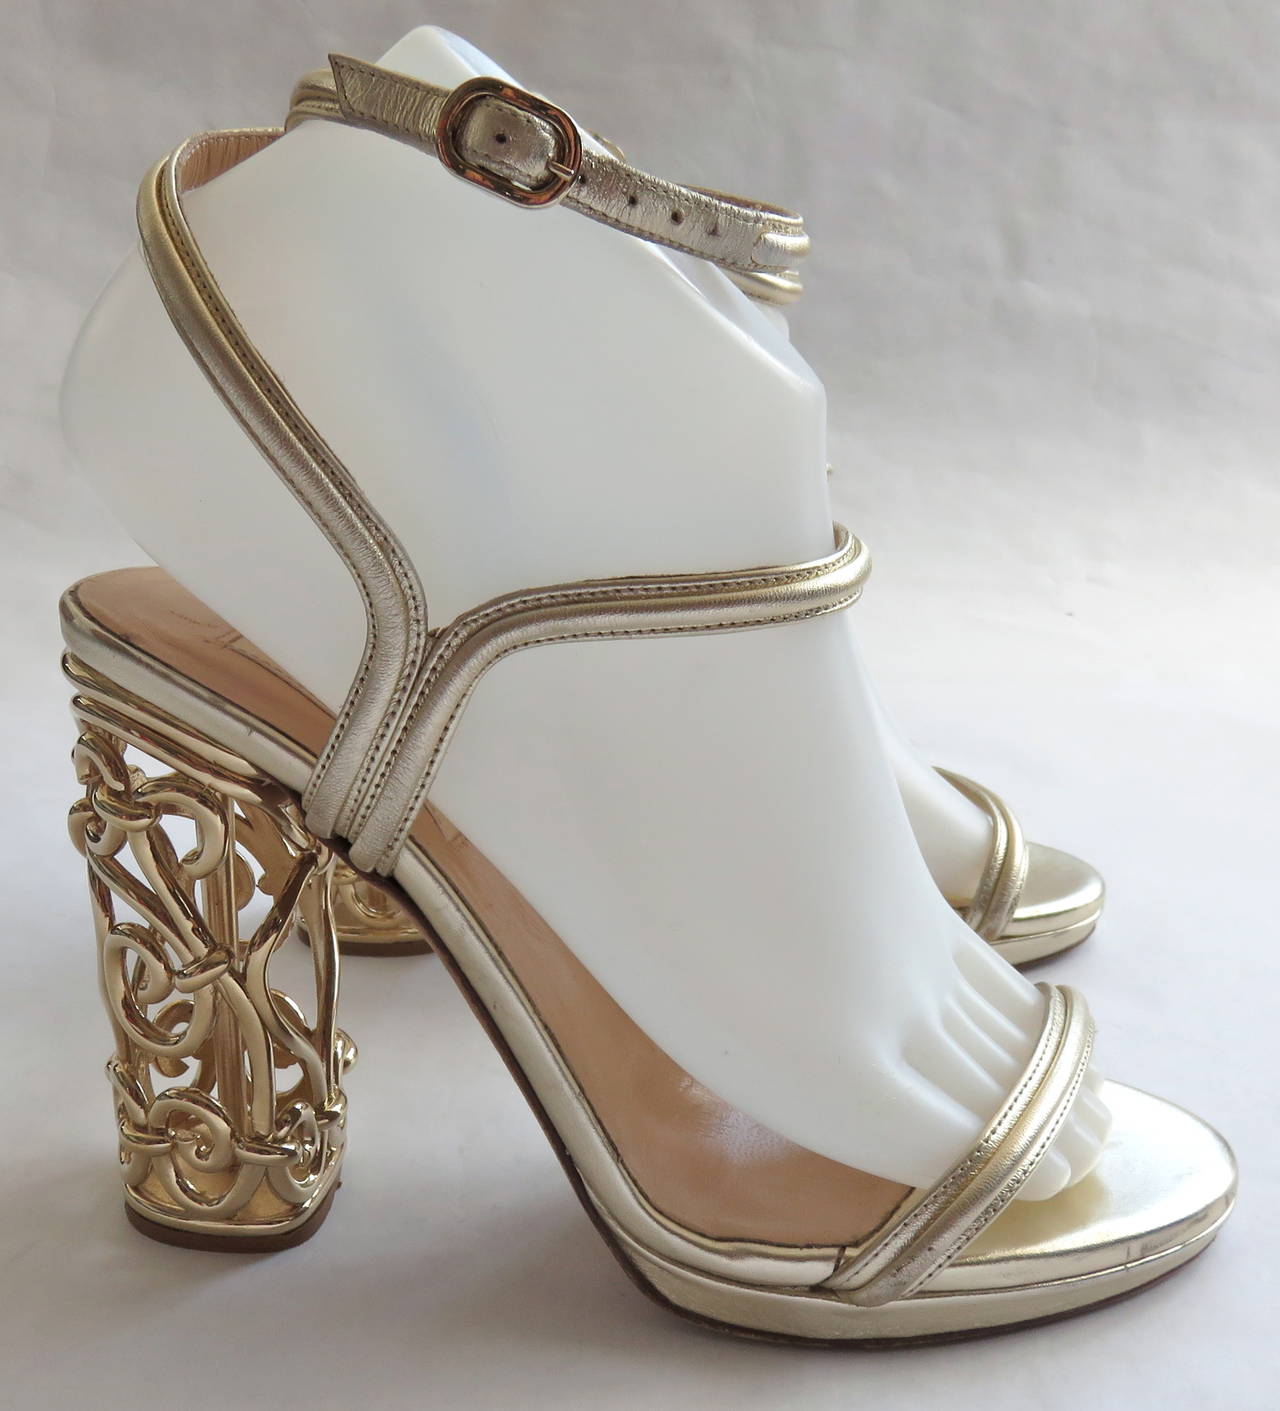 Women's VALENTINO Metallic gold leather & metal cage heels shoes